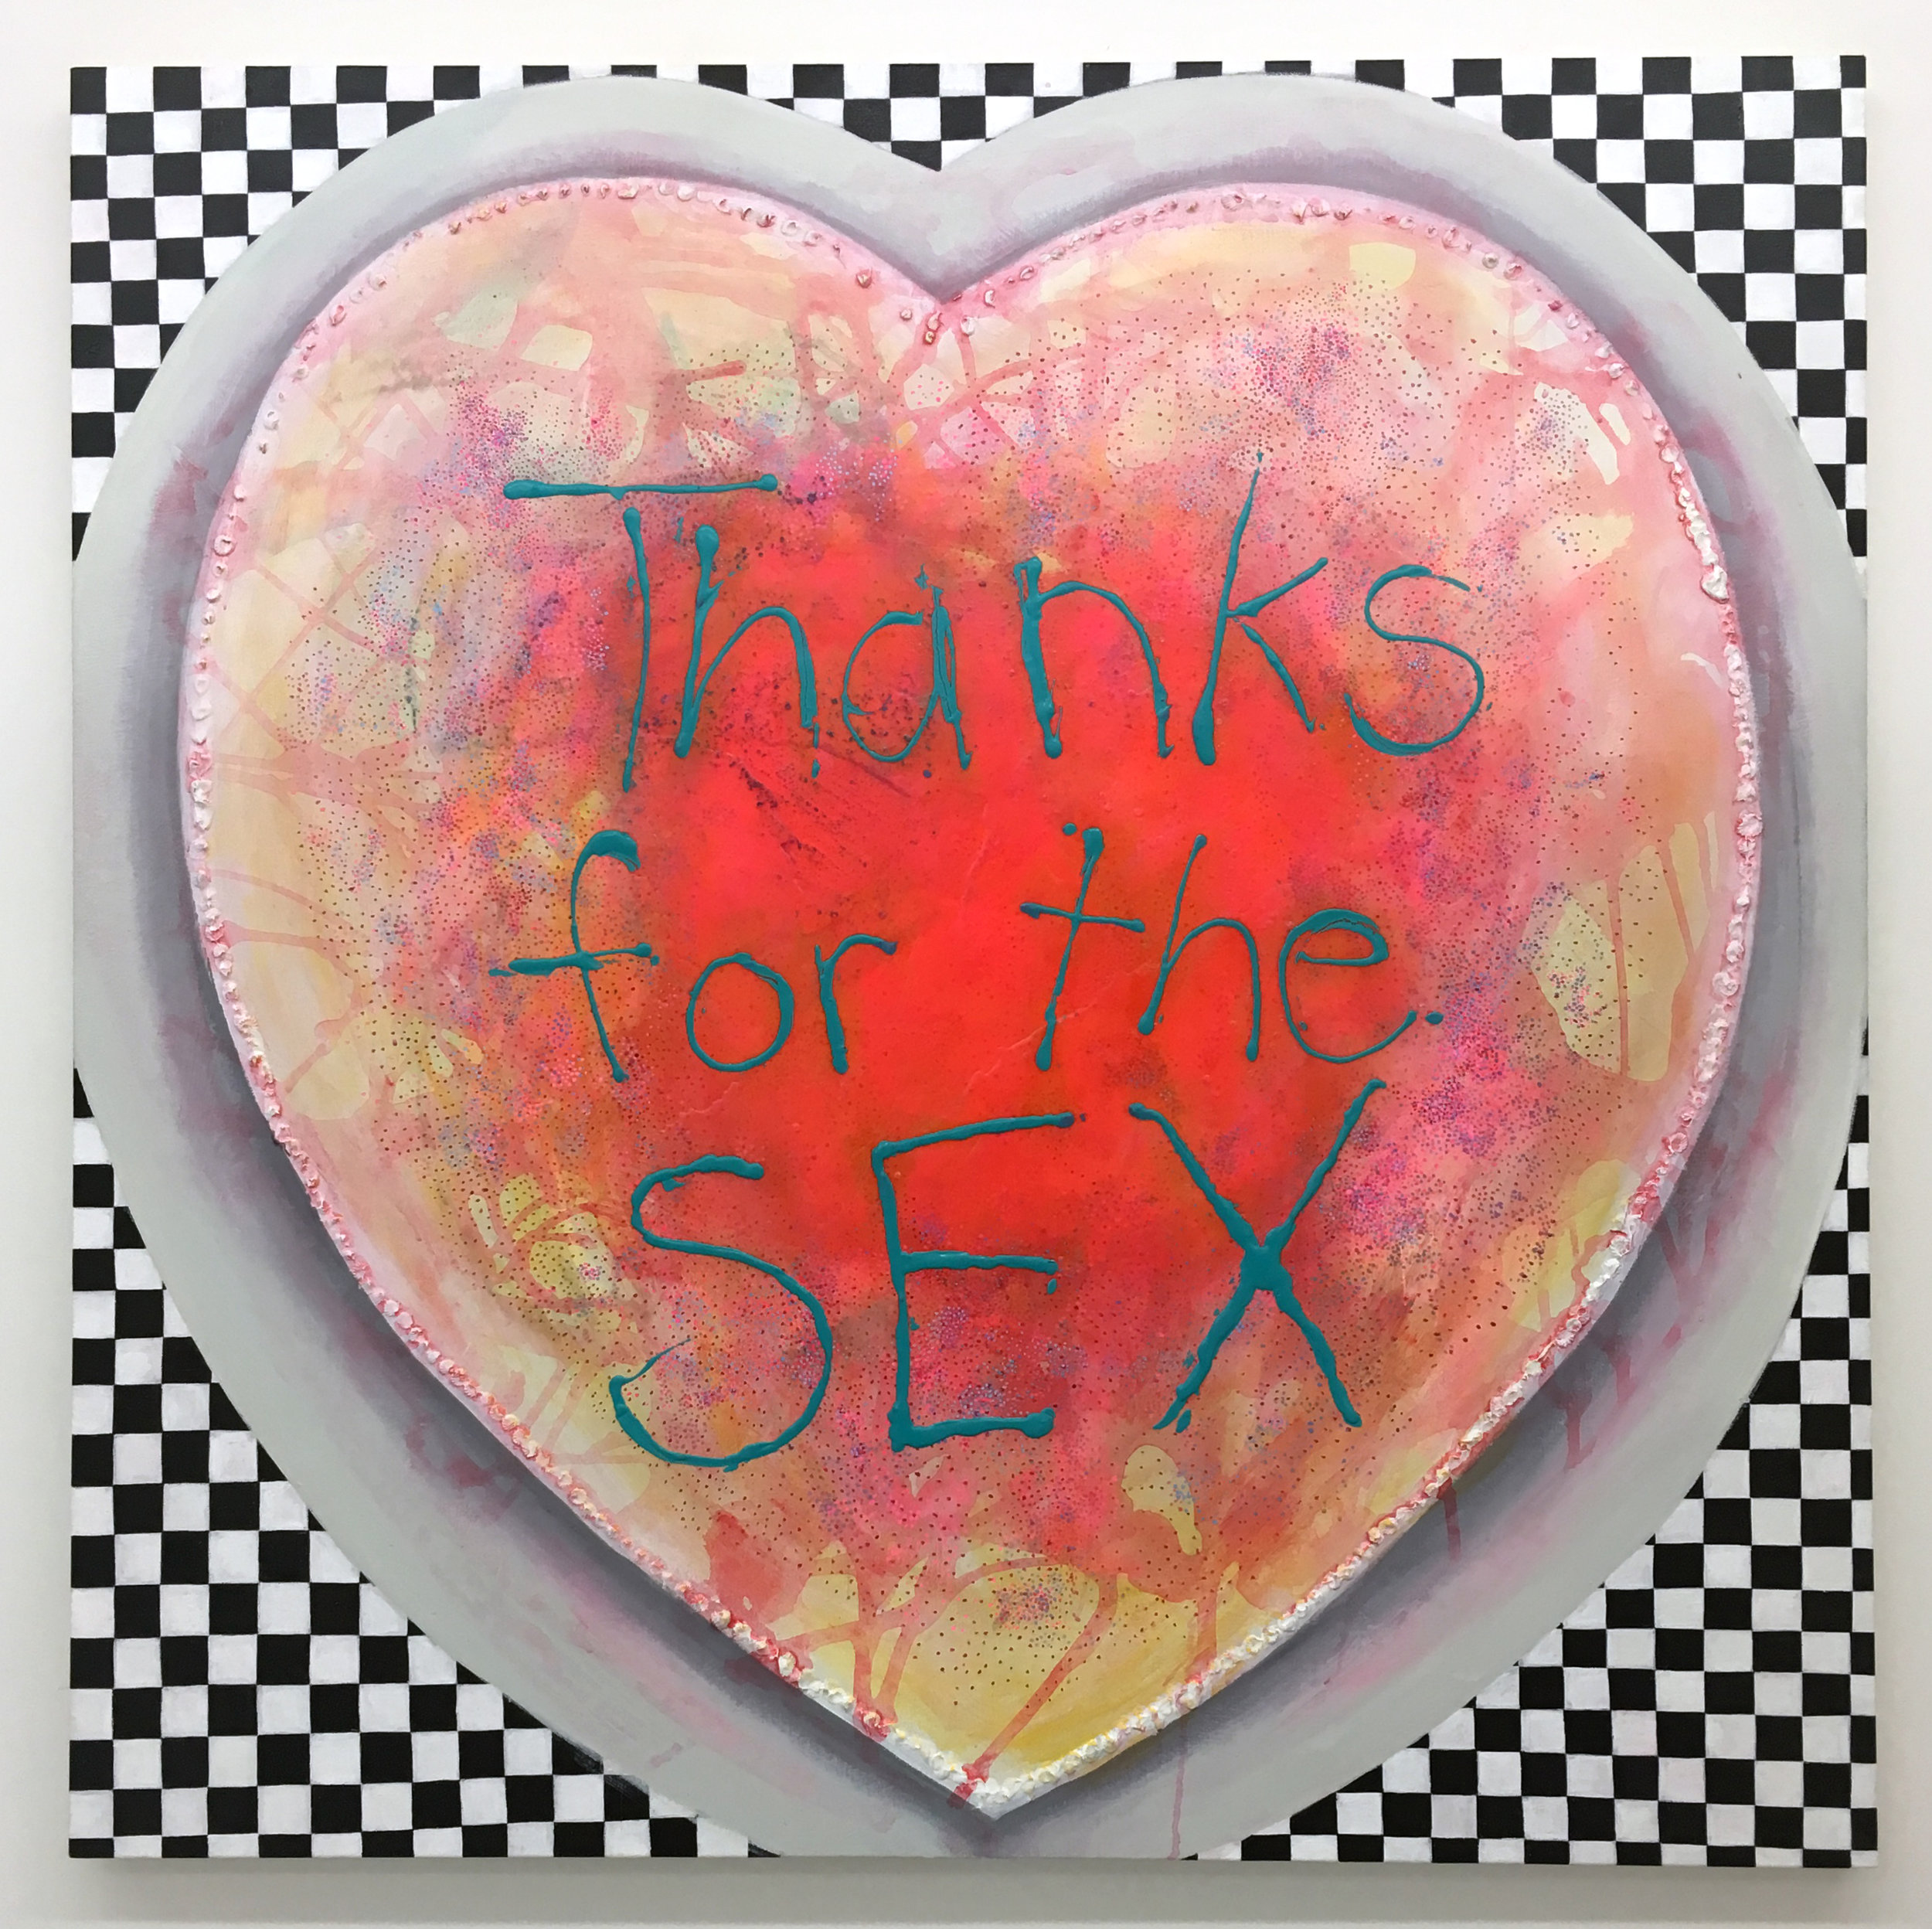  Jennifer Coates, Thanks for the Sex , 2017, Acrylic on Canvas, 48 x 48 inches 